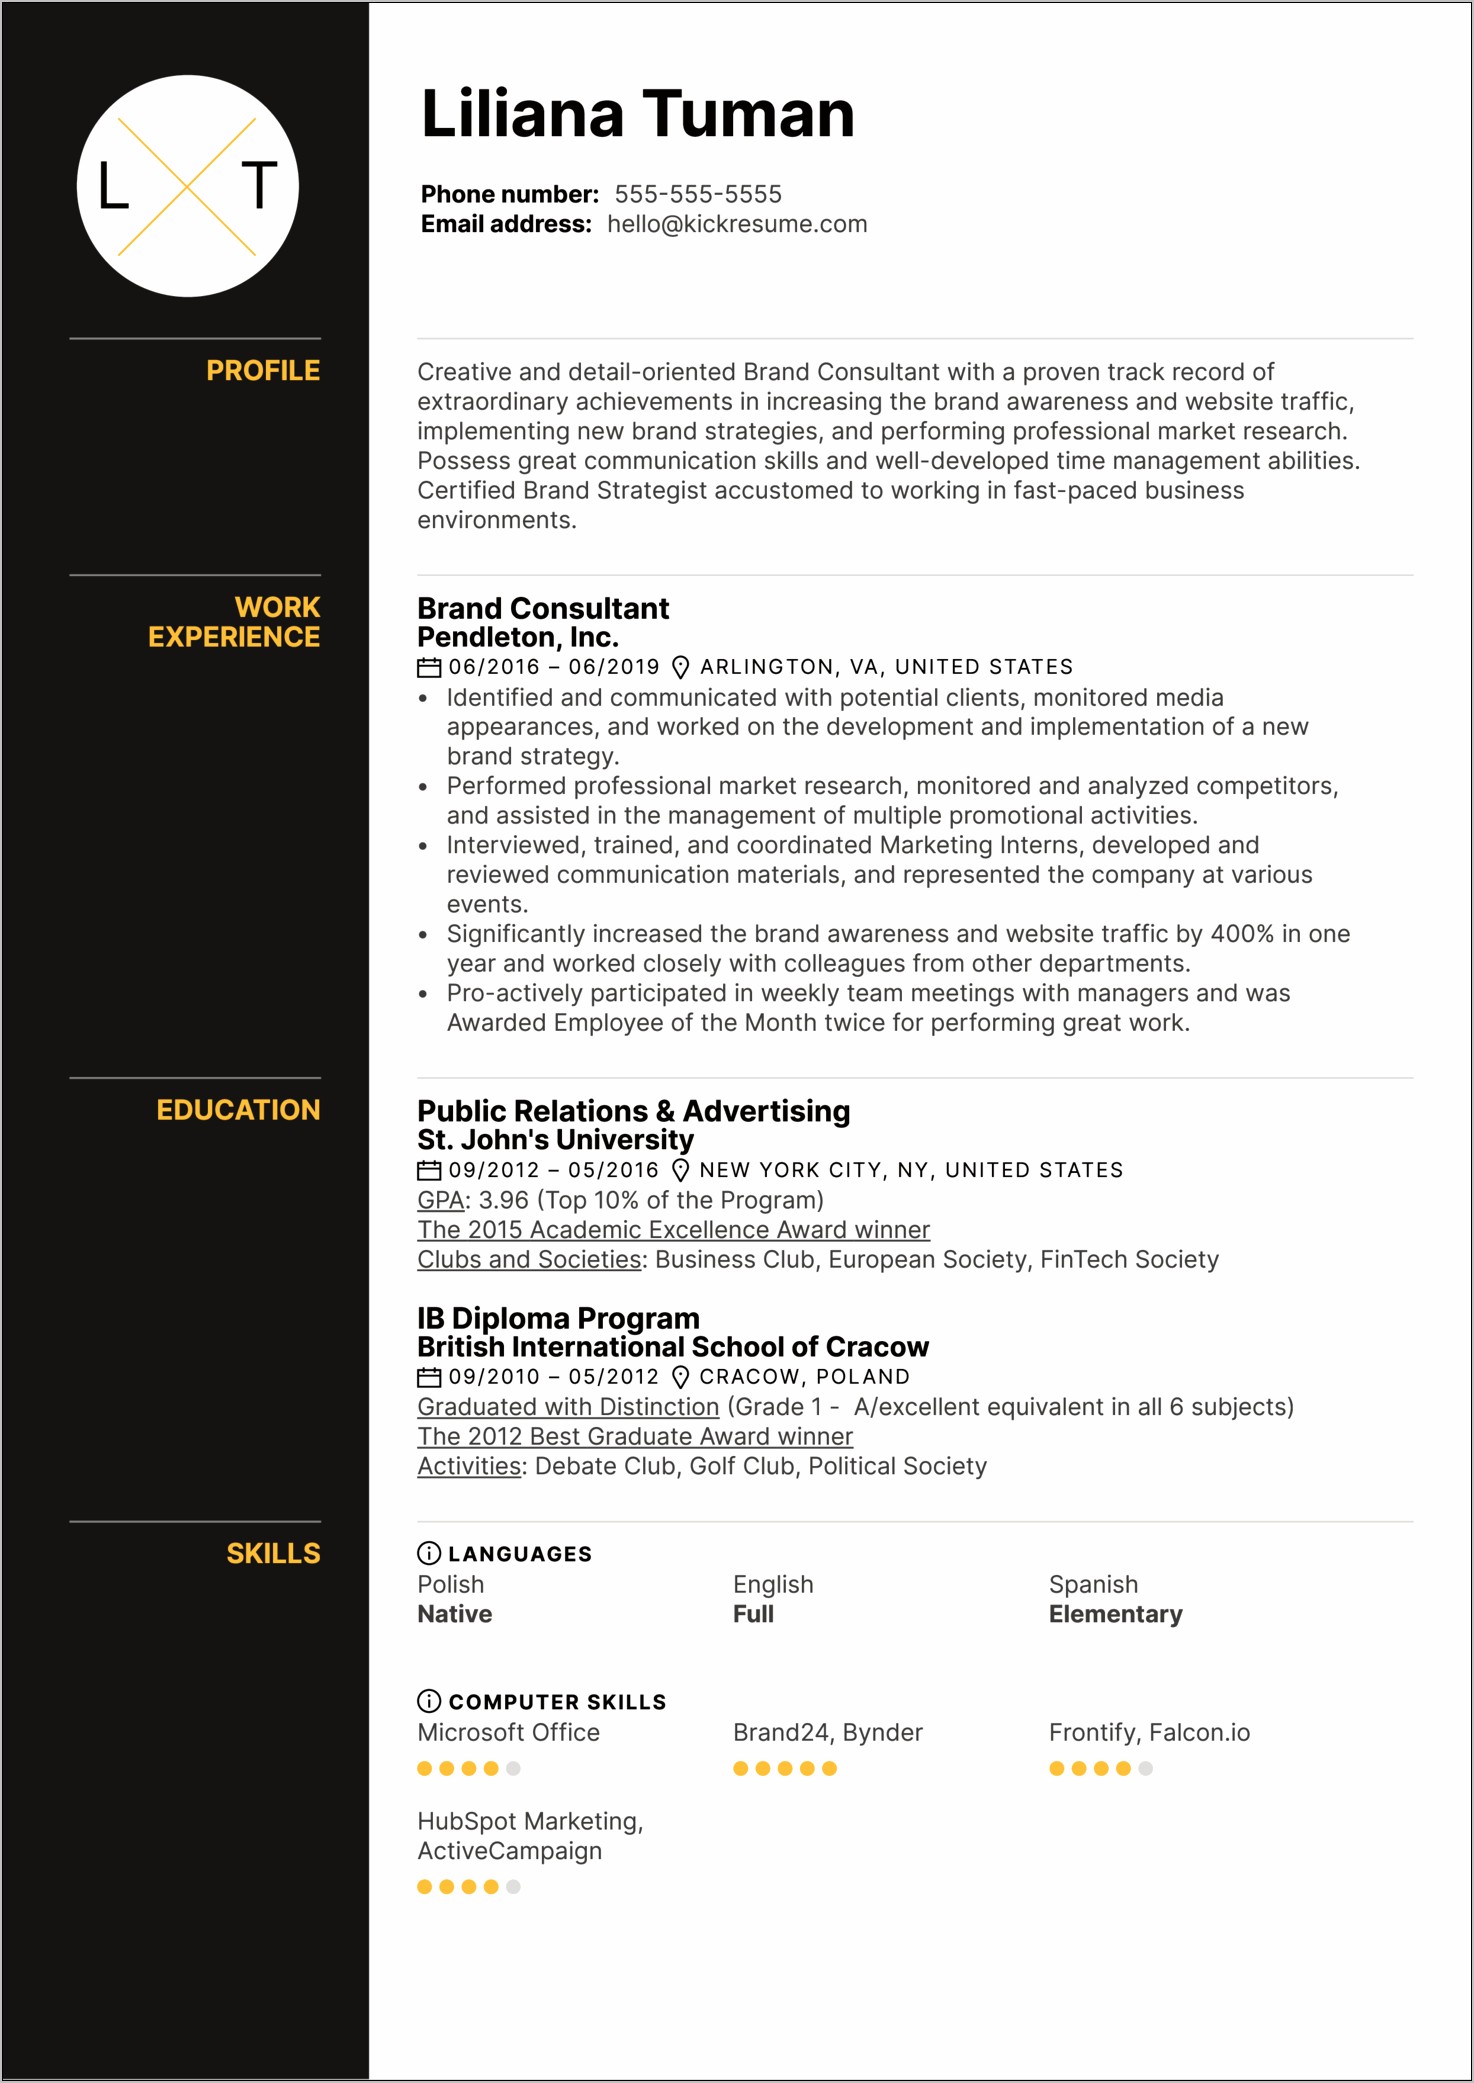 Is Resume Prof A Good Company